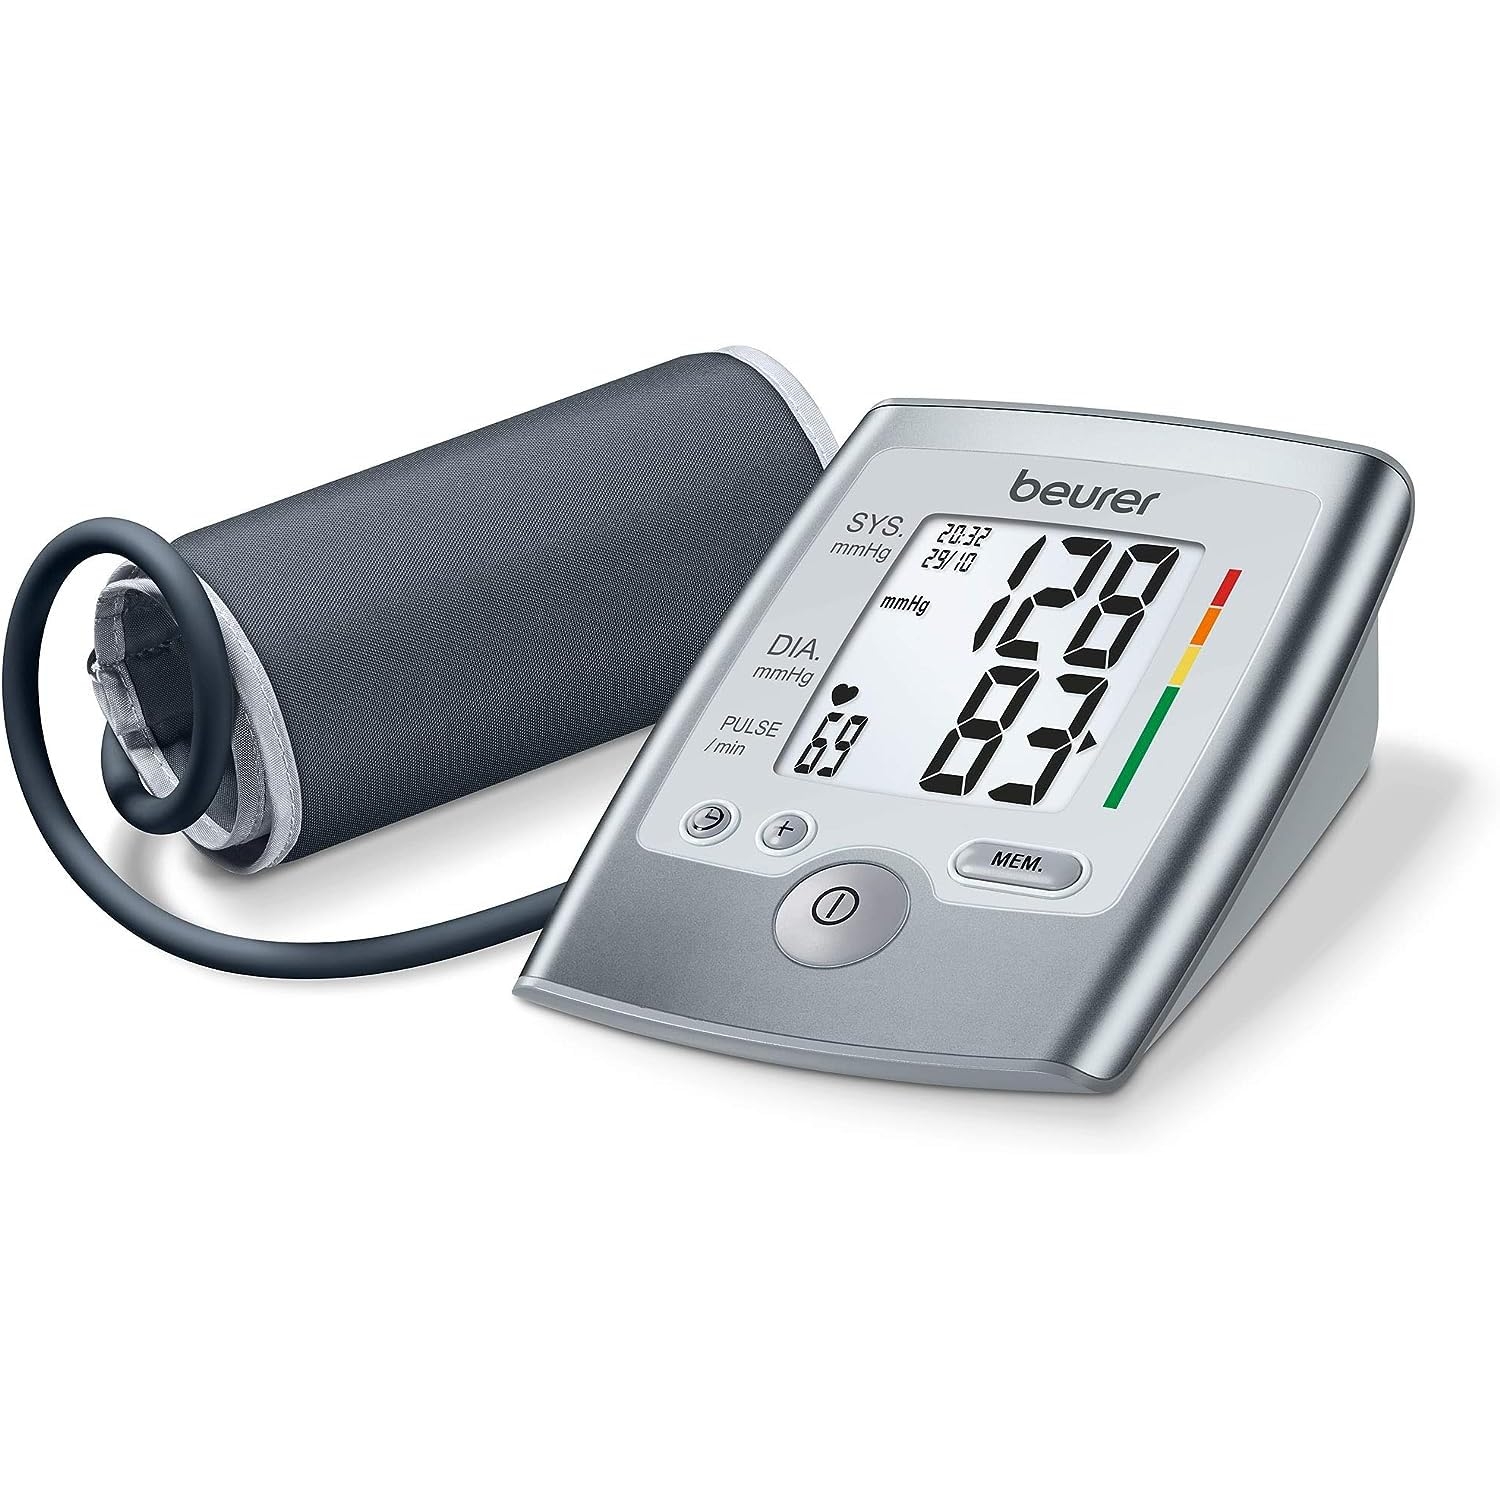 Beurer BM35 Fully Automatic Digital Blood Pressure Monitor | Cuff Wrapping, Memory Feature, Pulse Detection - 5 yr warranty